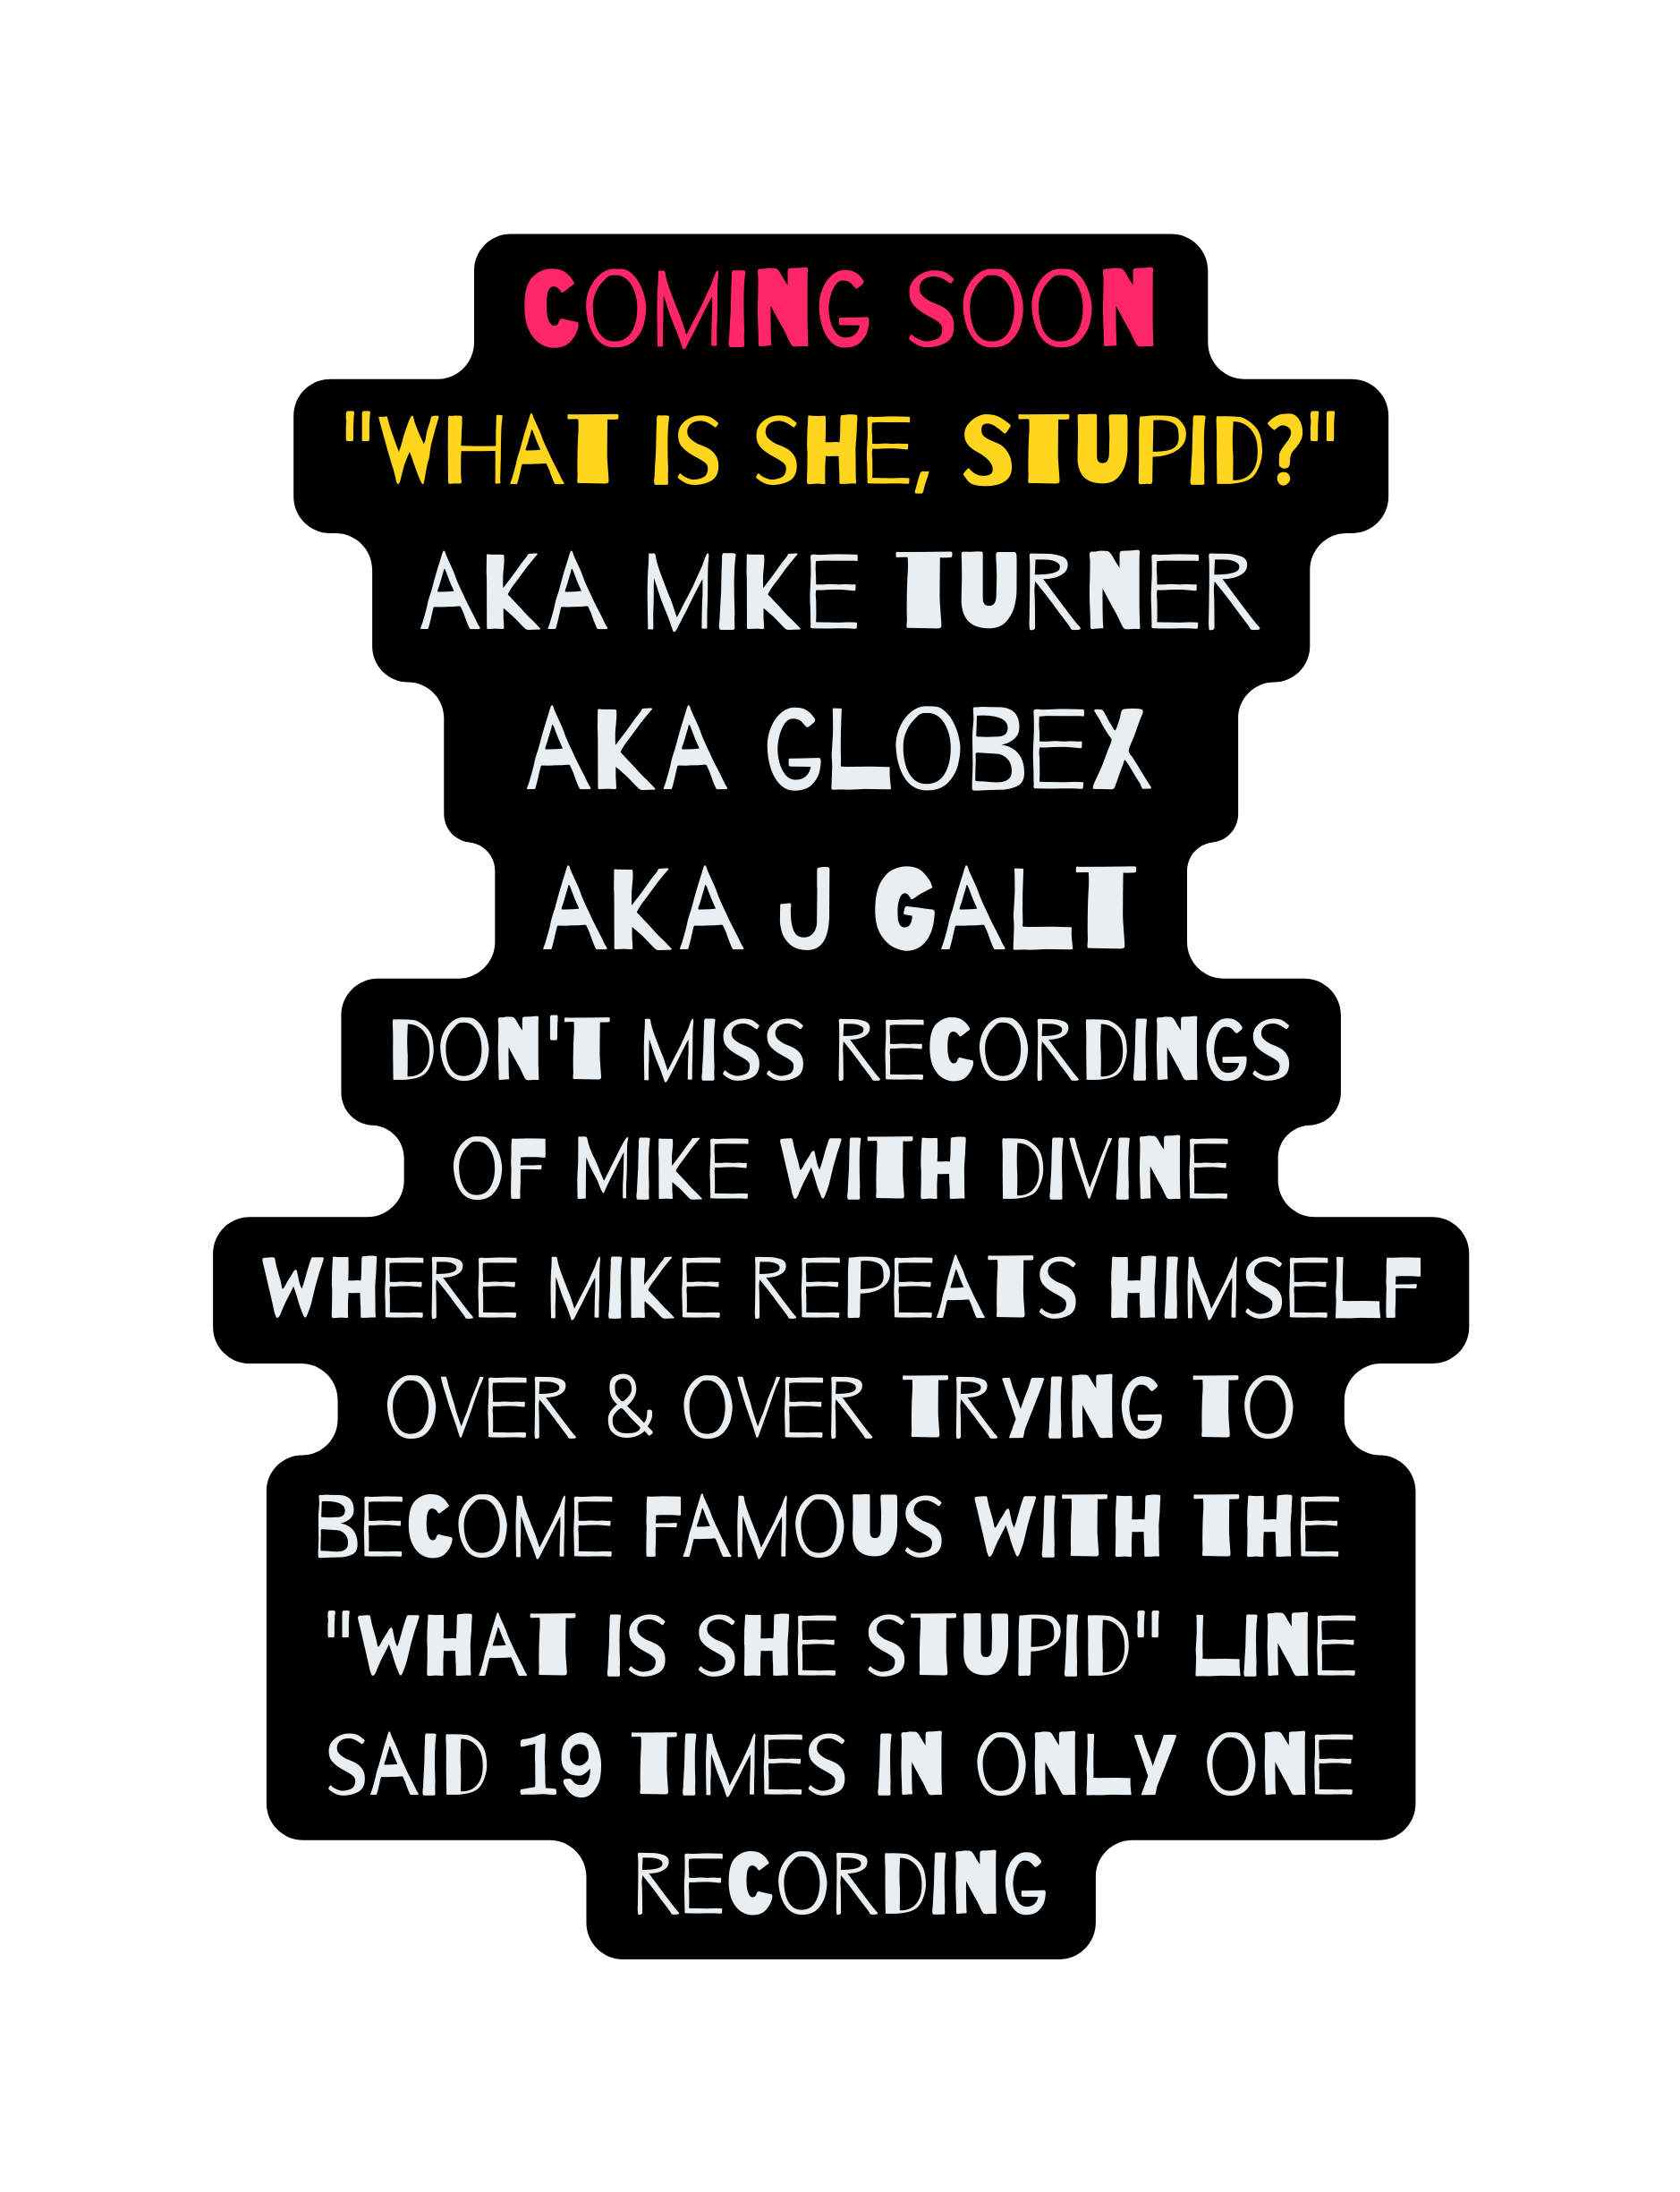 coming soon WHat is she Stupid aka mike turner aka globex aka J Galt don t miss recordings of Mike with divine where mike repeats himself over over trying to become famous with the what is she stupid line said 19 times in only one recording